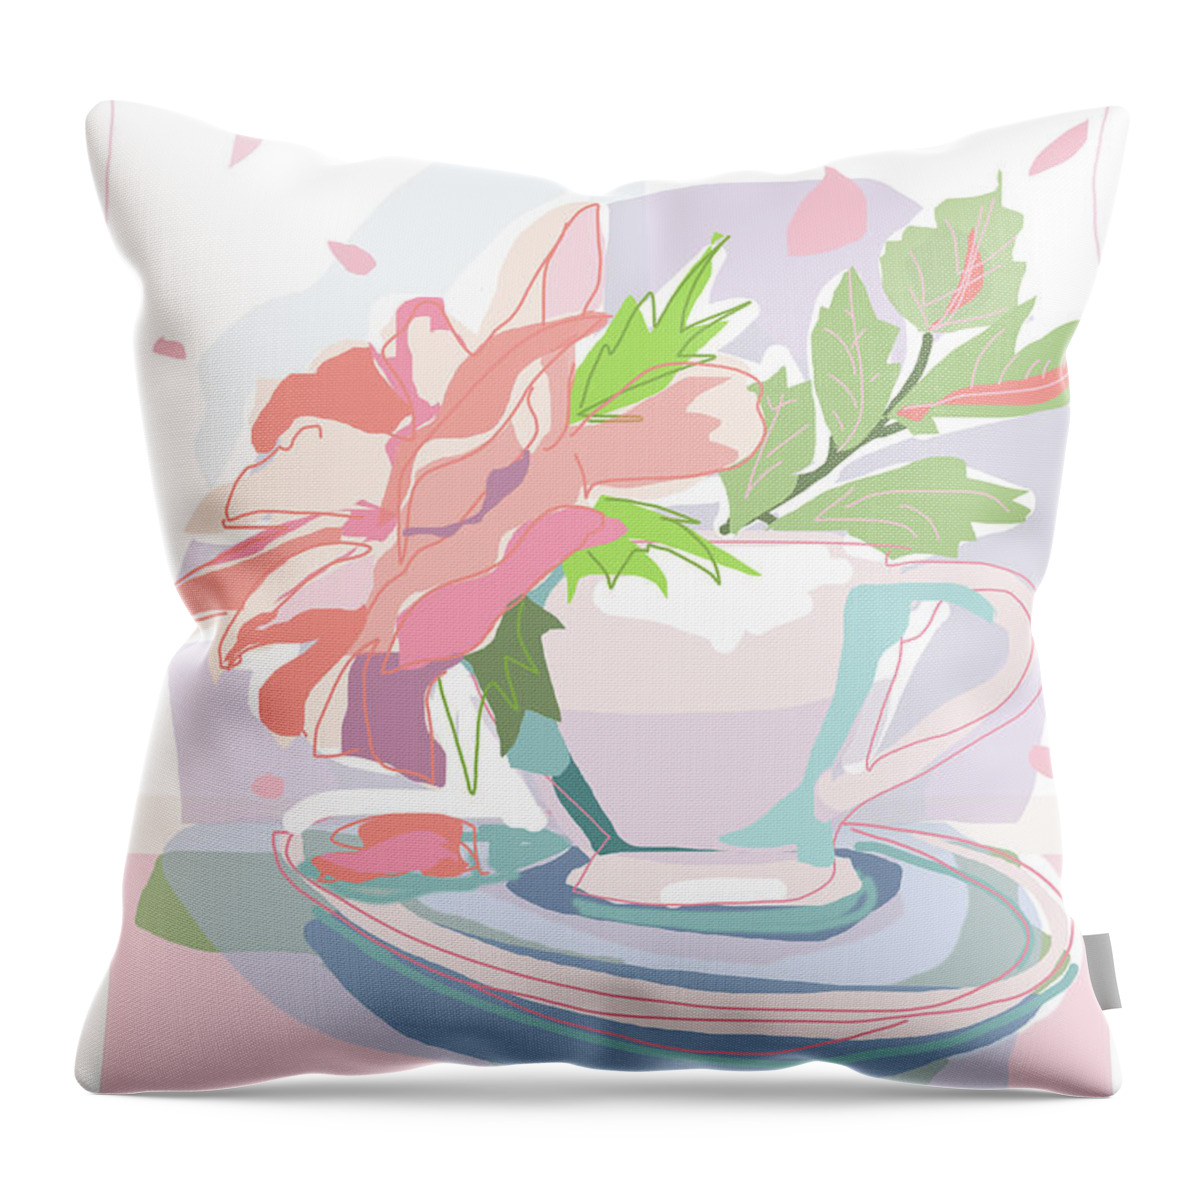 Fun Style Throw Pillow featuring the drawing 0060-Rose by Anke Classen